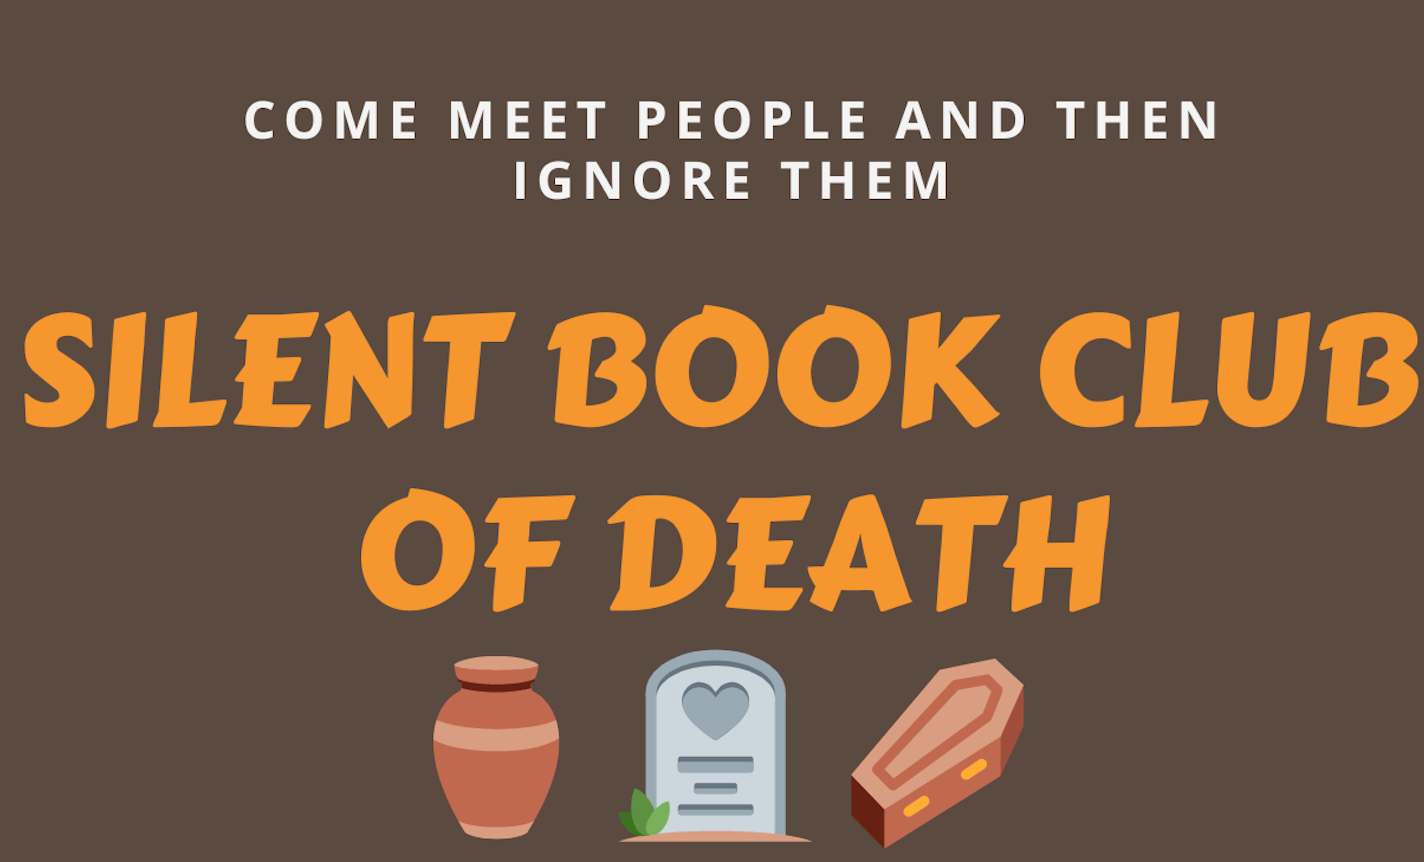 Silent Book Club of Death - September